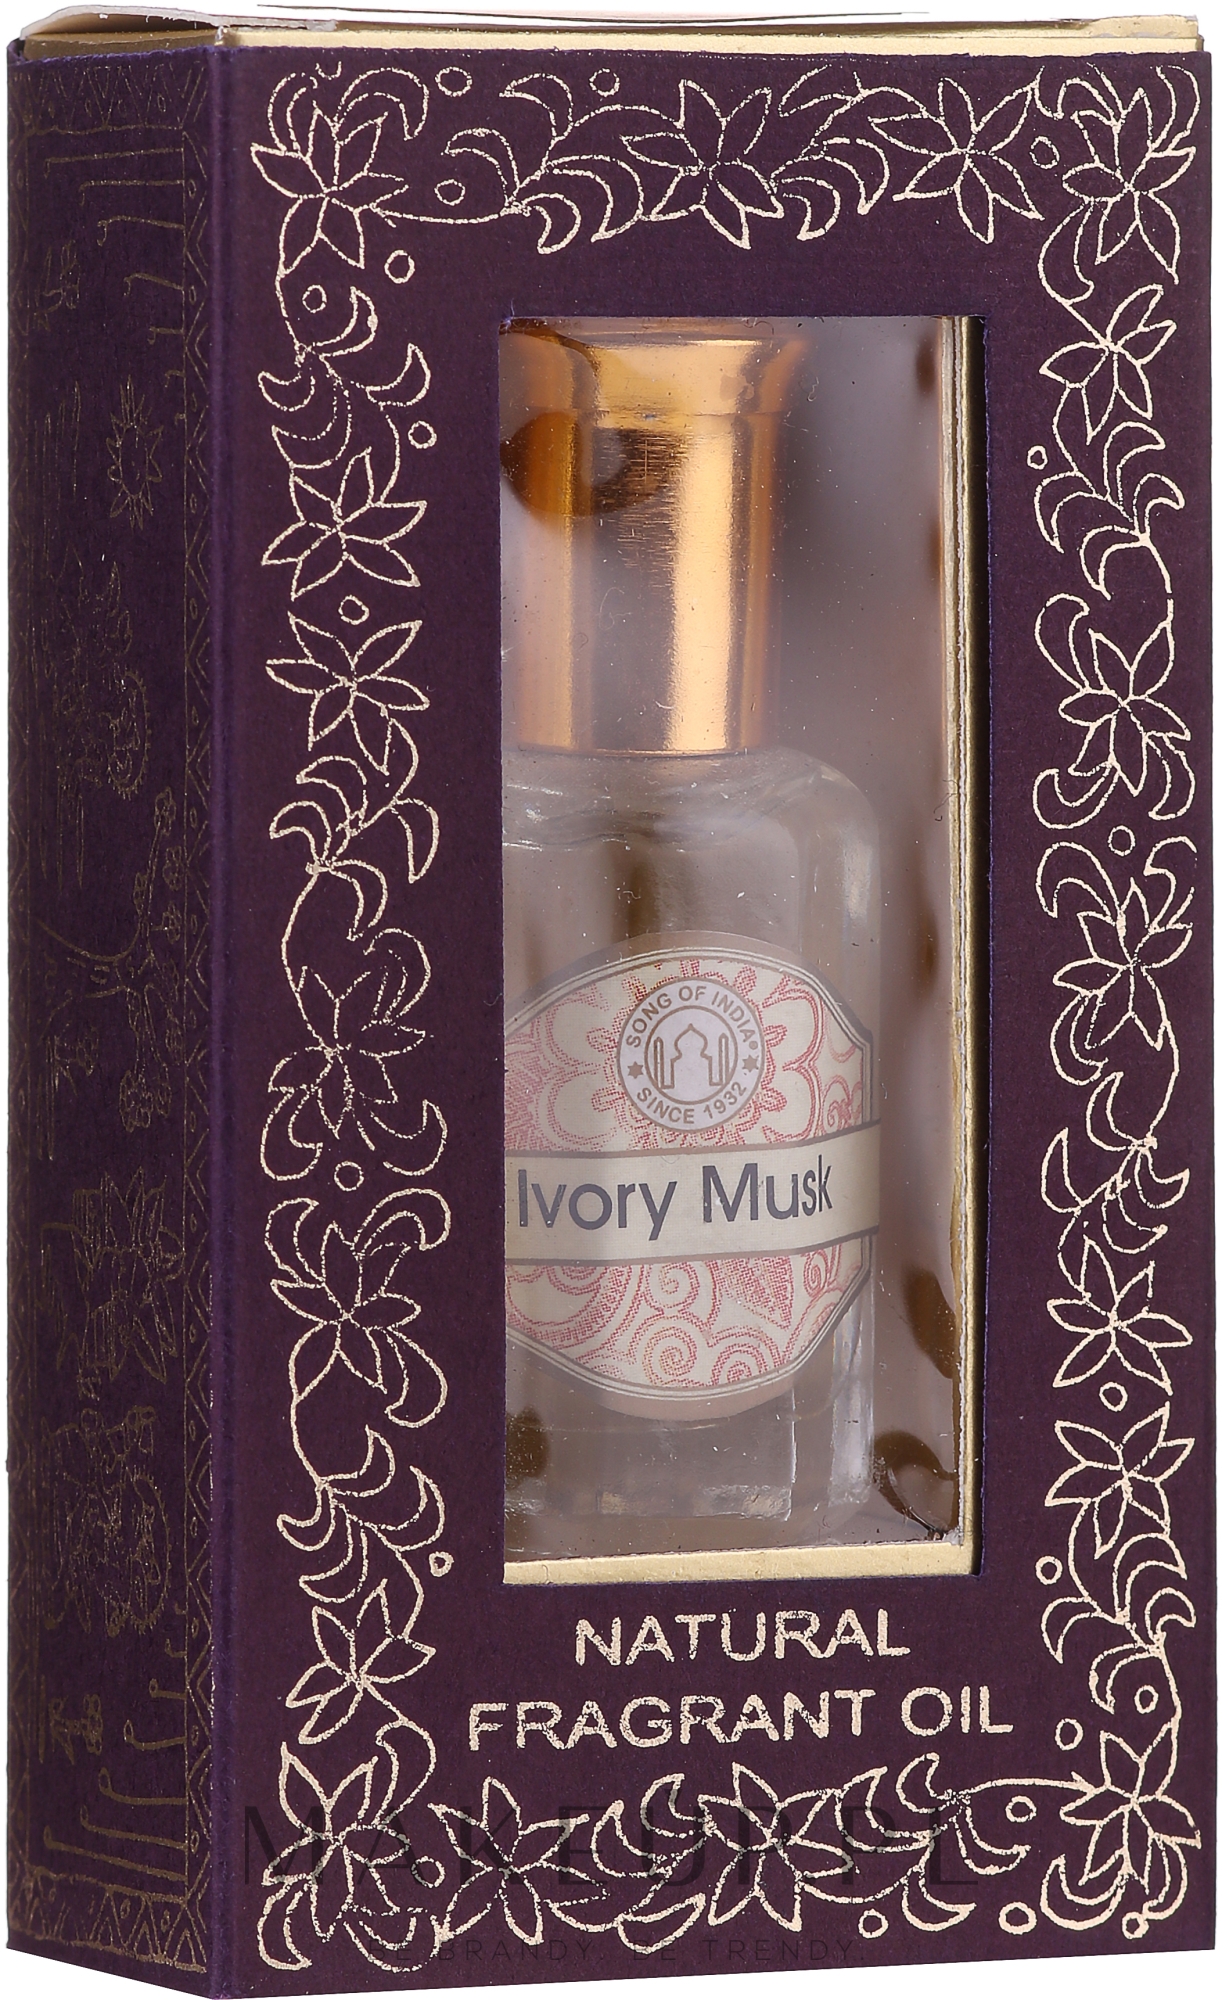 song of india ivory musk